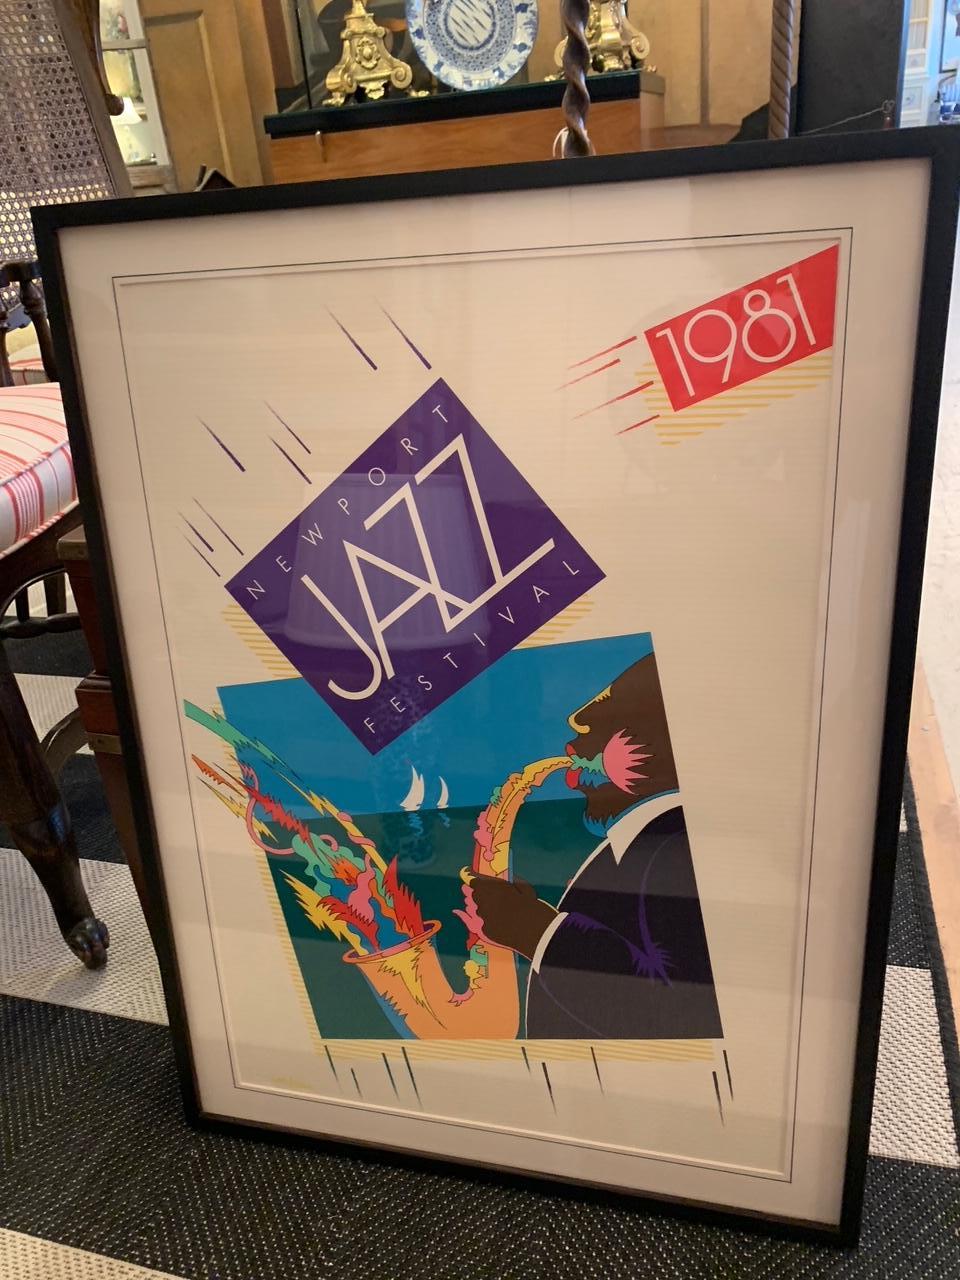 Delightful Newport Jazz Festival Limited Edition Poster In Good Condition For Sale In Hopewell, NJ